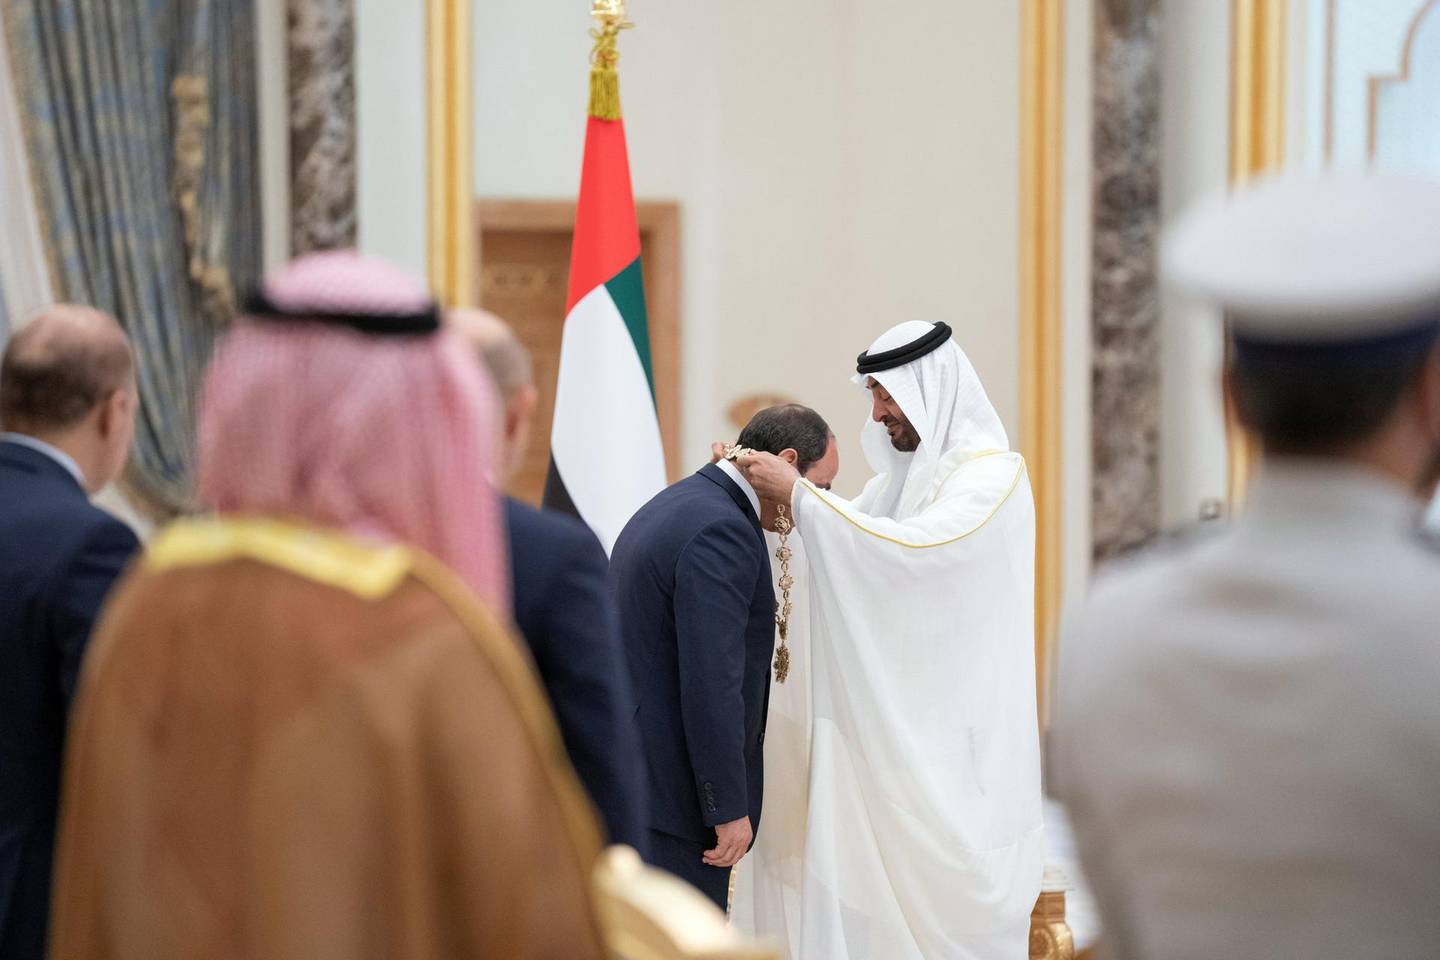 ABU DHABI, UNITED ARAB EMIRATES - November 14, 2019: HH Sheikh Mohamed bin Zayed Al Nahyan, Crown Prince of Abu Dhabi and Deputy Supreme Commander of the UAE Armed Forces (R), confers the Order of Zayed medal to HE Abdel Fattah El Sisi, President of Egypt (L), during a state visit reception at Qasr Al Watan.

( Hamad Al Mansoori for the Ministry of Presidential Affairs )

---